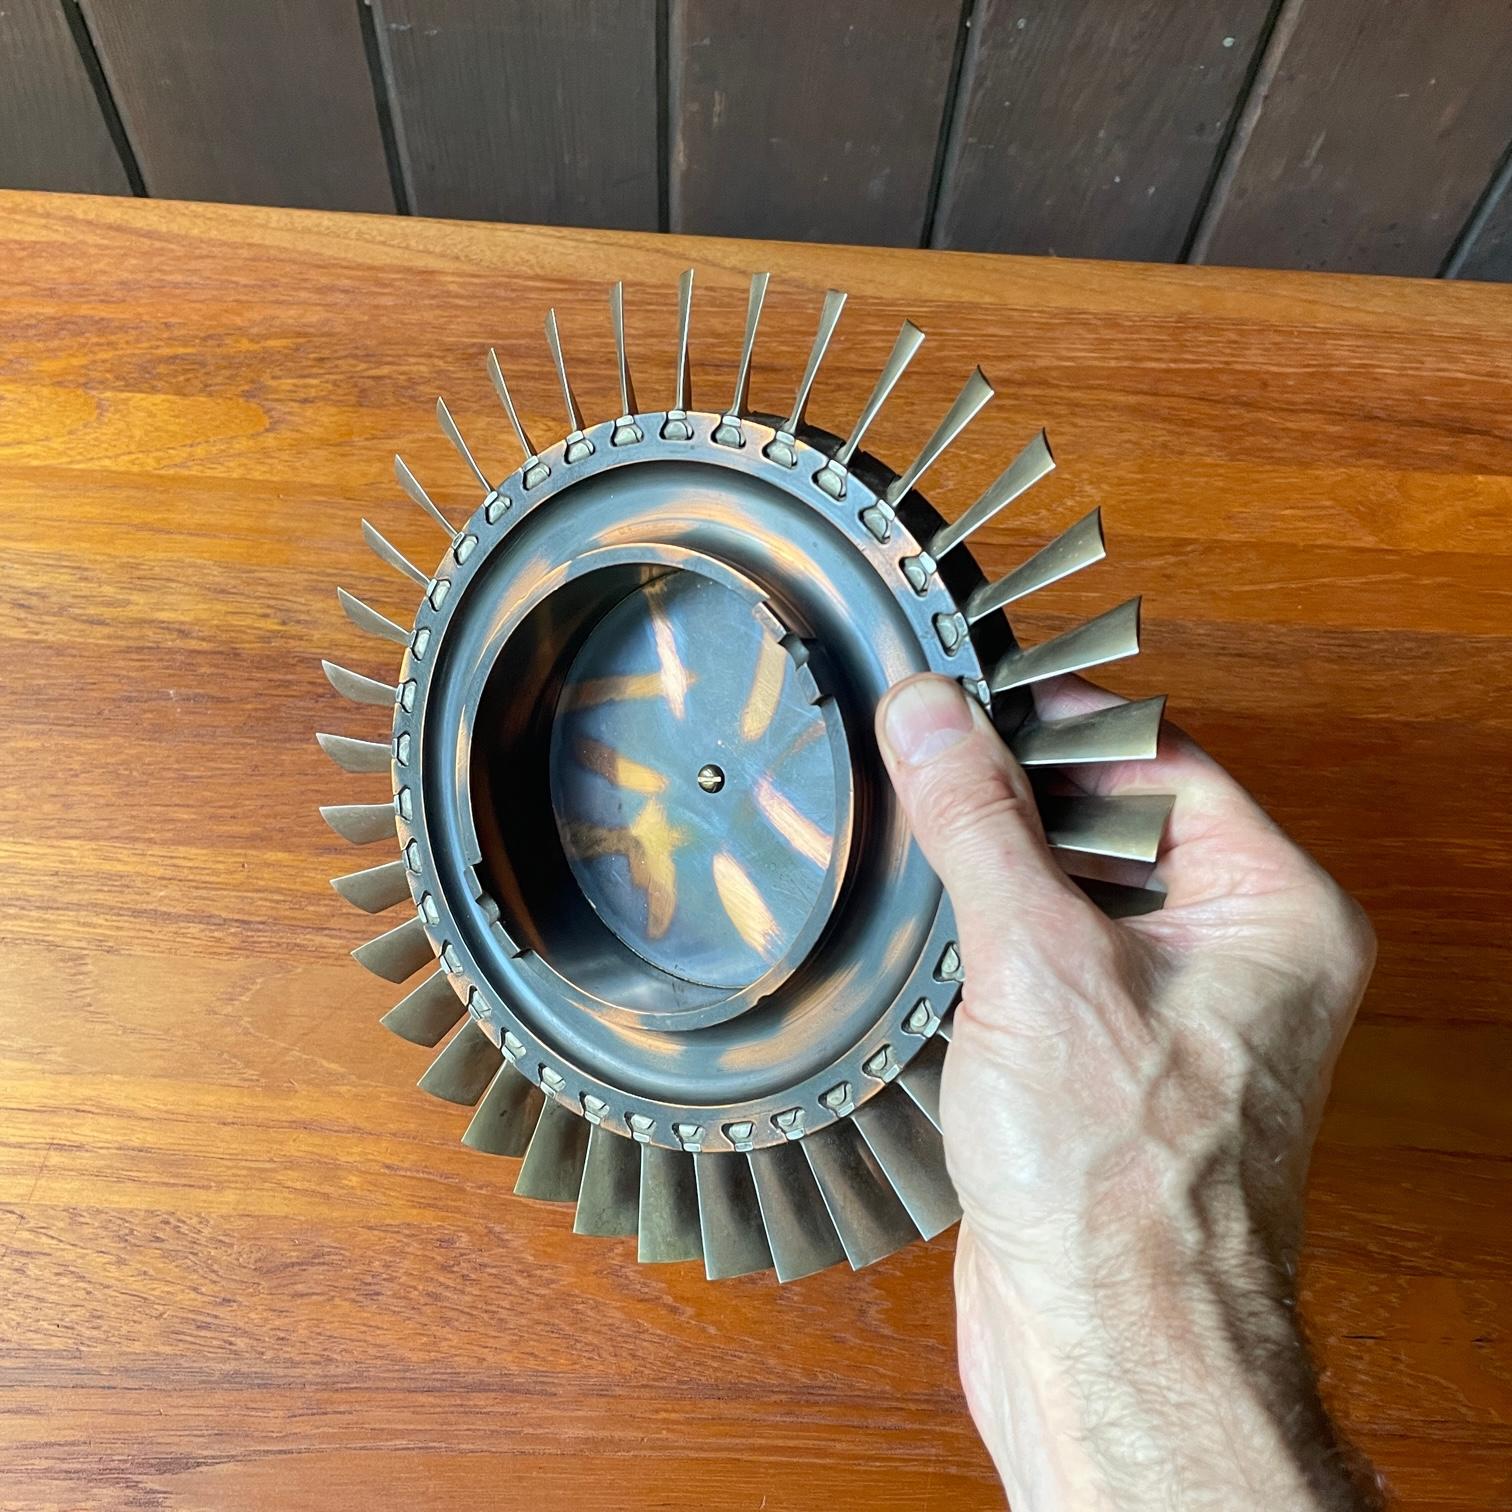 Japanned Turbine Engine Dish Bowl Industrial Vintage Aviation Relic For Sale 3